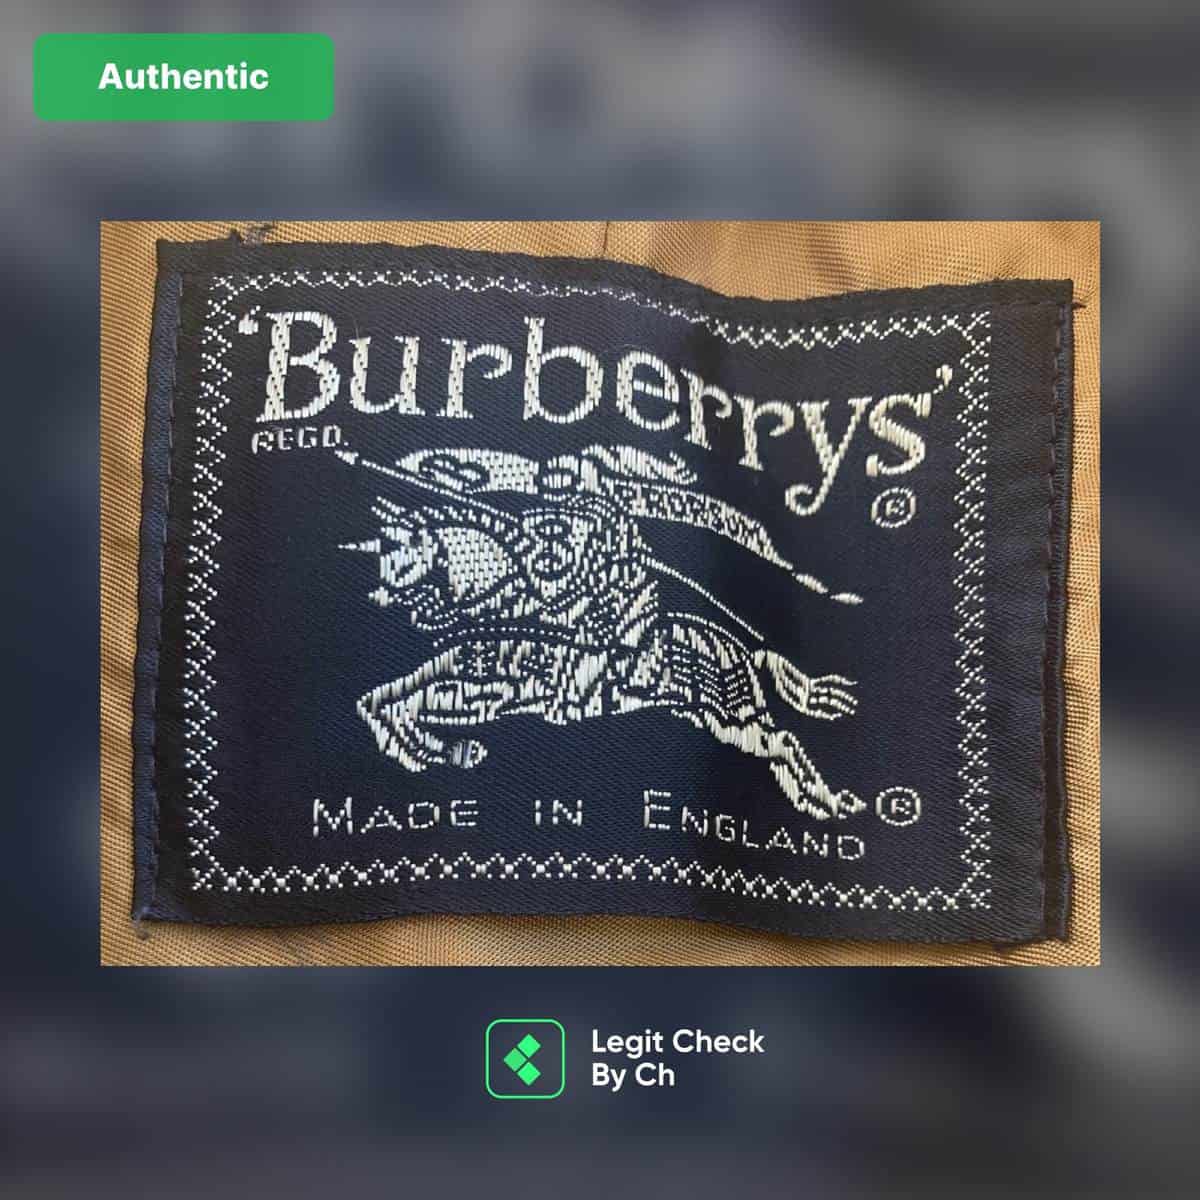 Please send help - this trench real or fake? The seller says “ Burberrys' ”  had an 's' in it before their re-brand in 1990 (which is true). I'm  skeptical of the